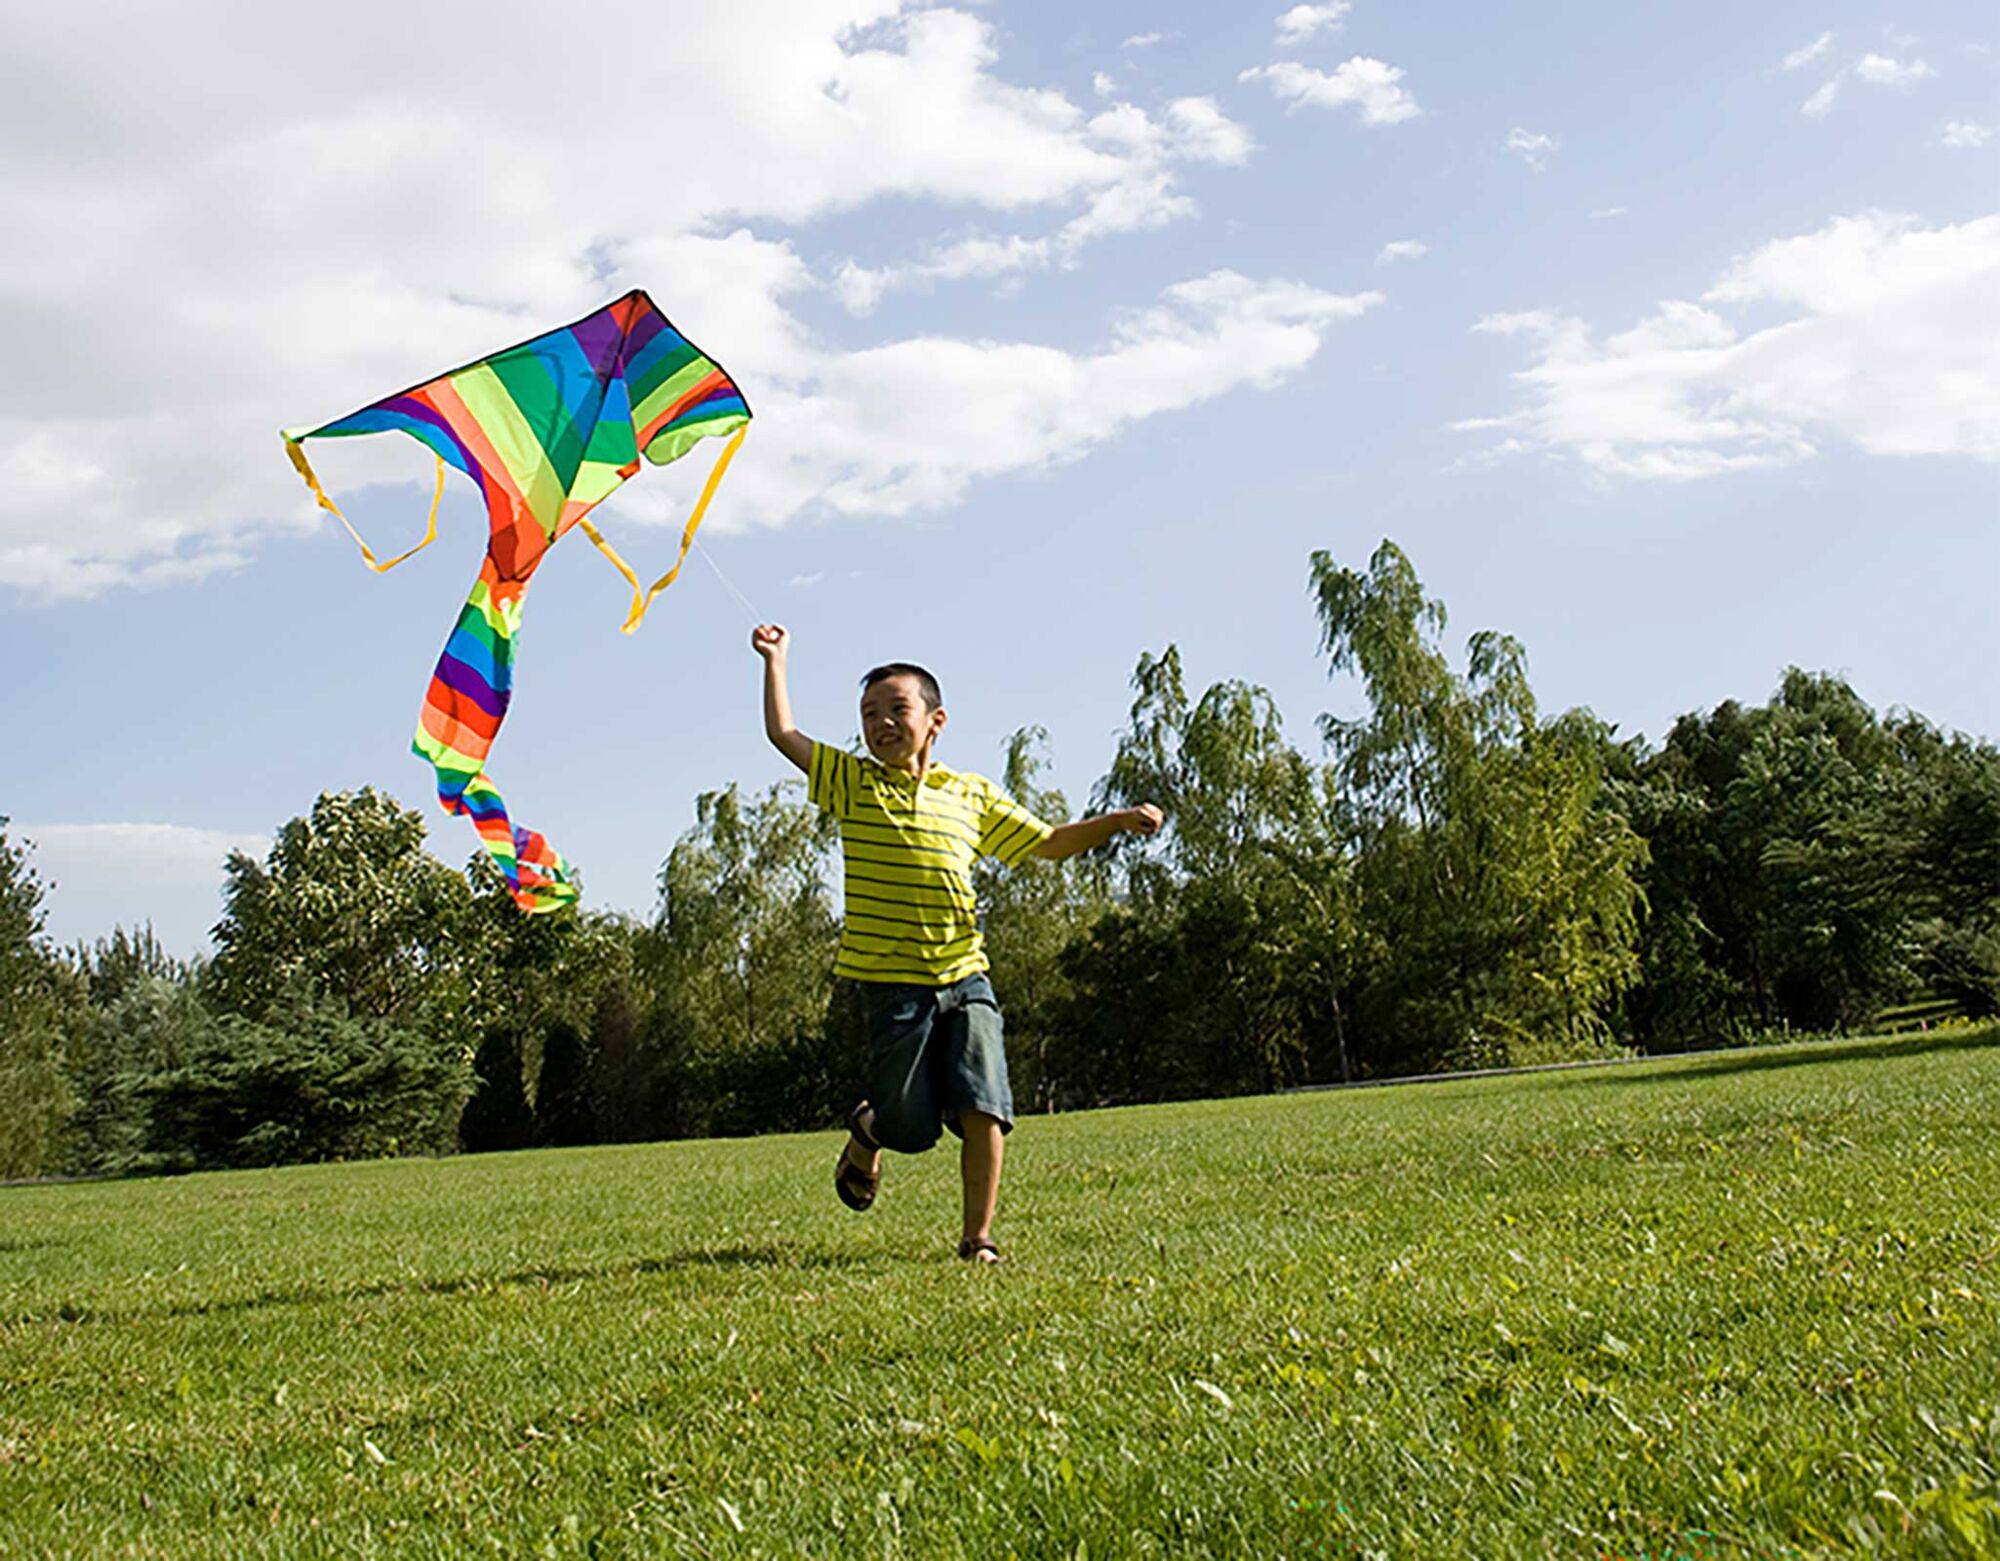 A young boy runs through a field of grass, holding up a large rainbow kite.